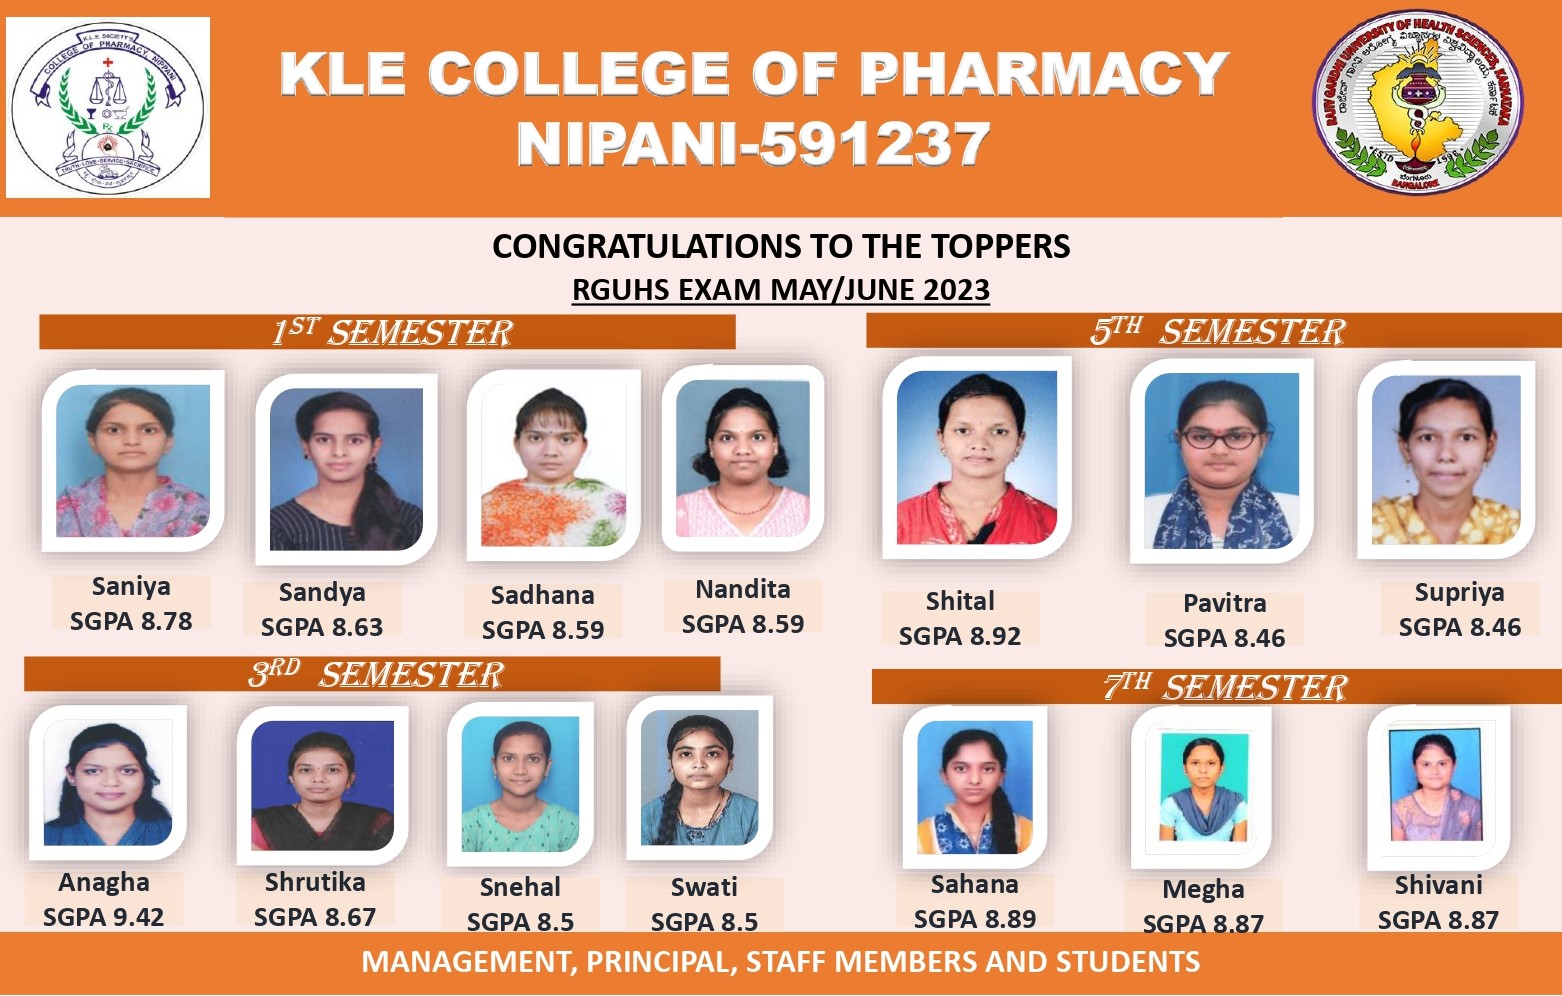 RGUHS Exam May/June 2023 Toppers